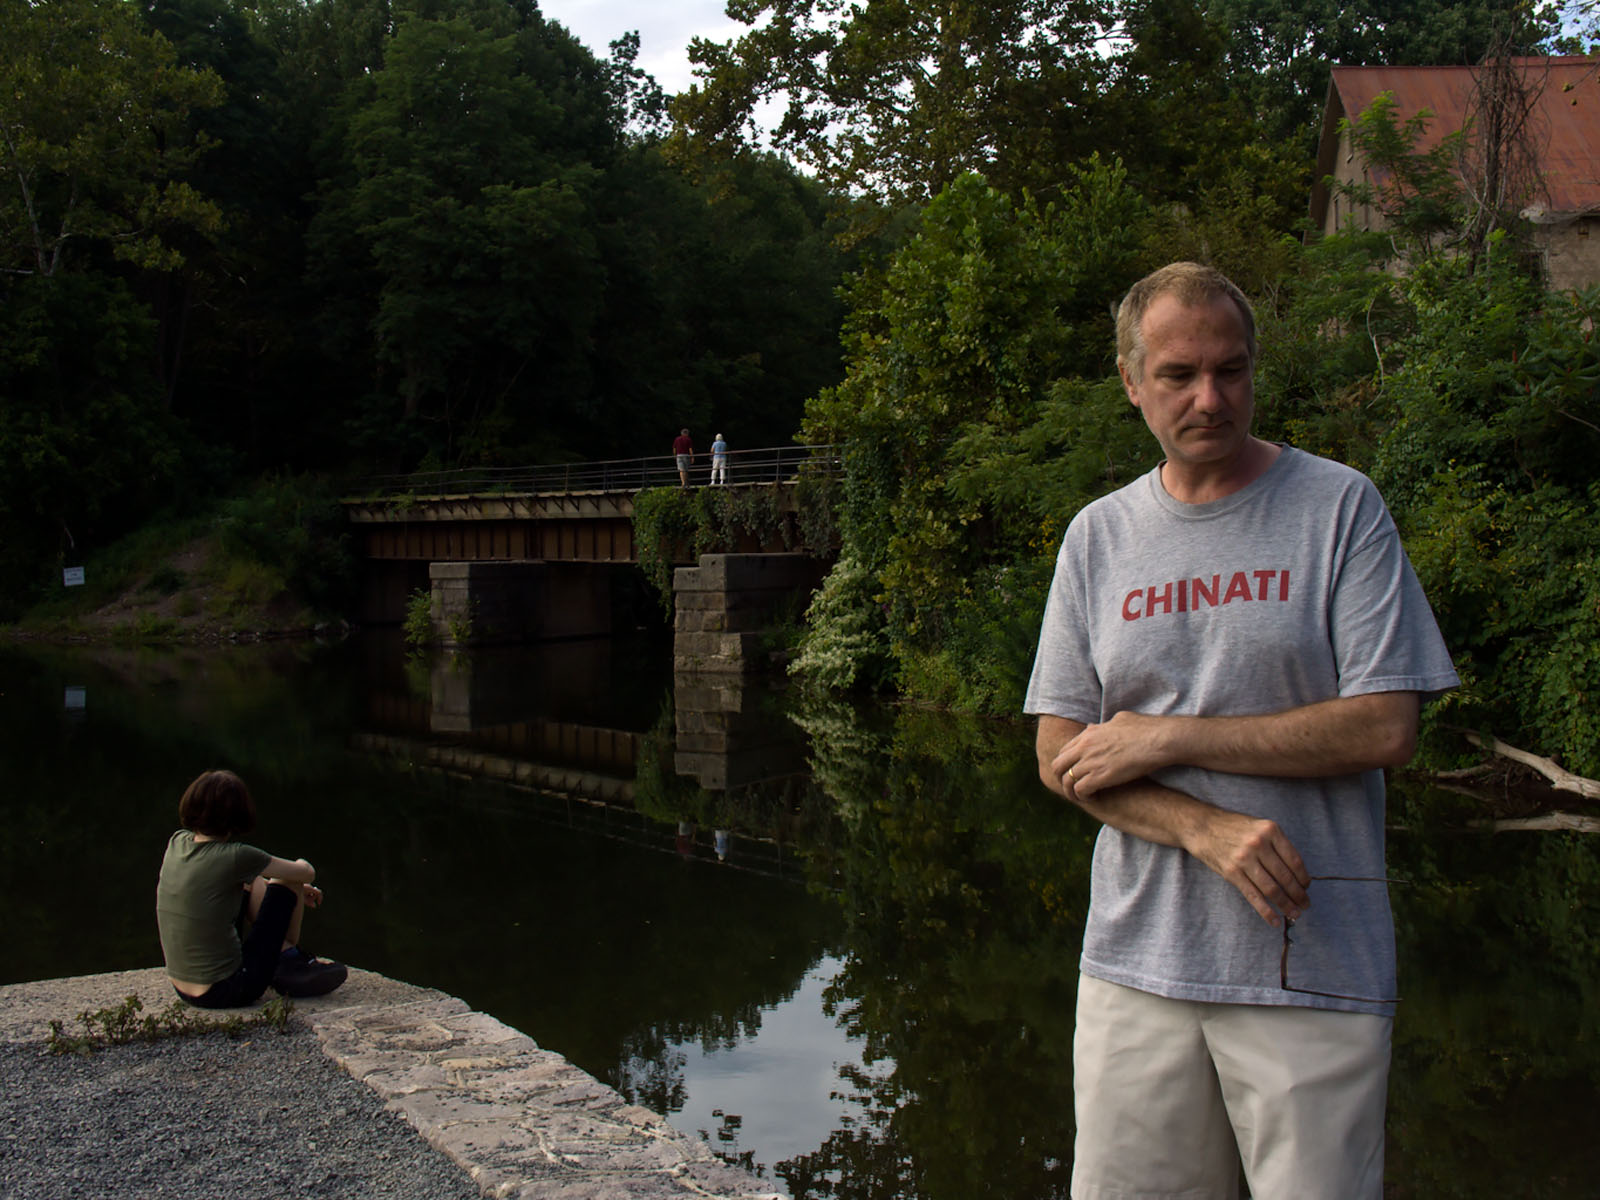 Scenes From a Life: Intimate Couples, Standing by the Canal